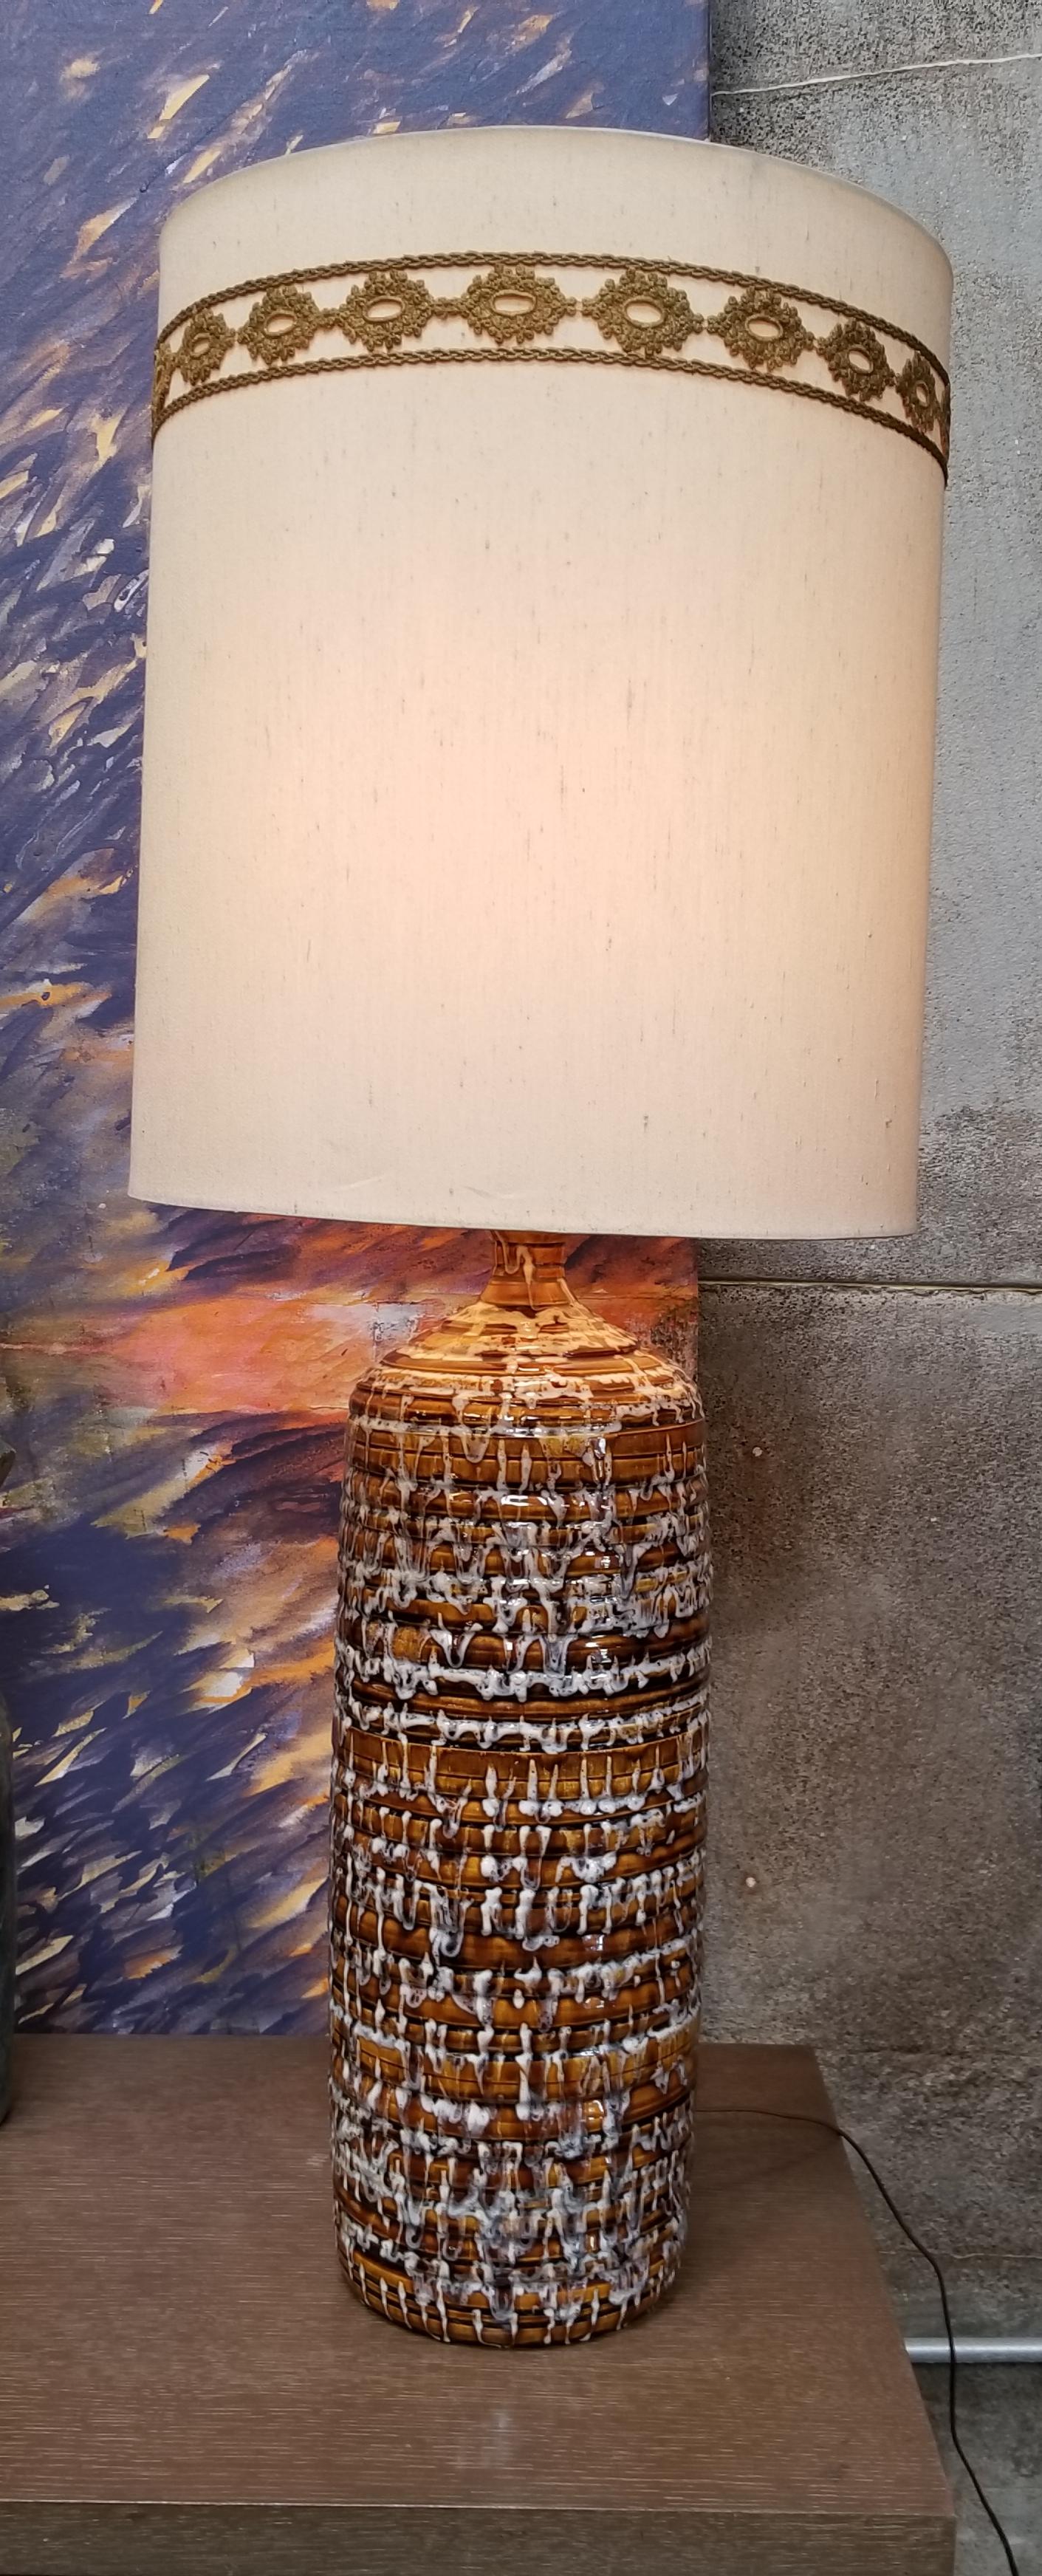 A 1960s ceramic lamp with a multi-color drip glaze. Primary colors are white, black and light brown. Vintage shade included.

Ceramic portion of lamp measures 23.5 inches in height.